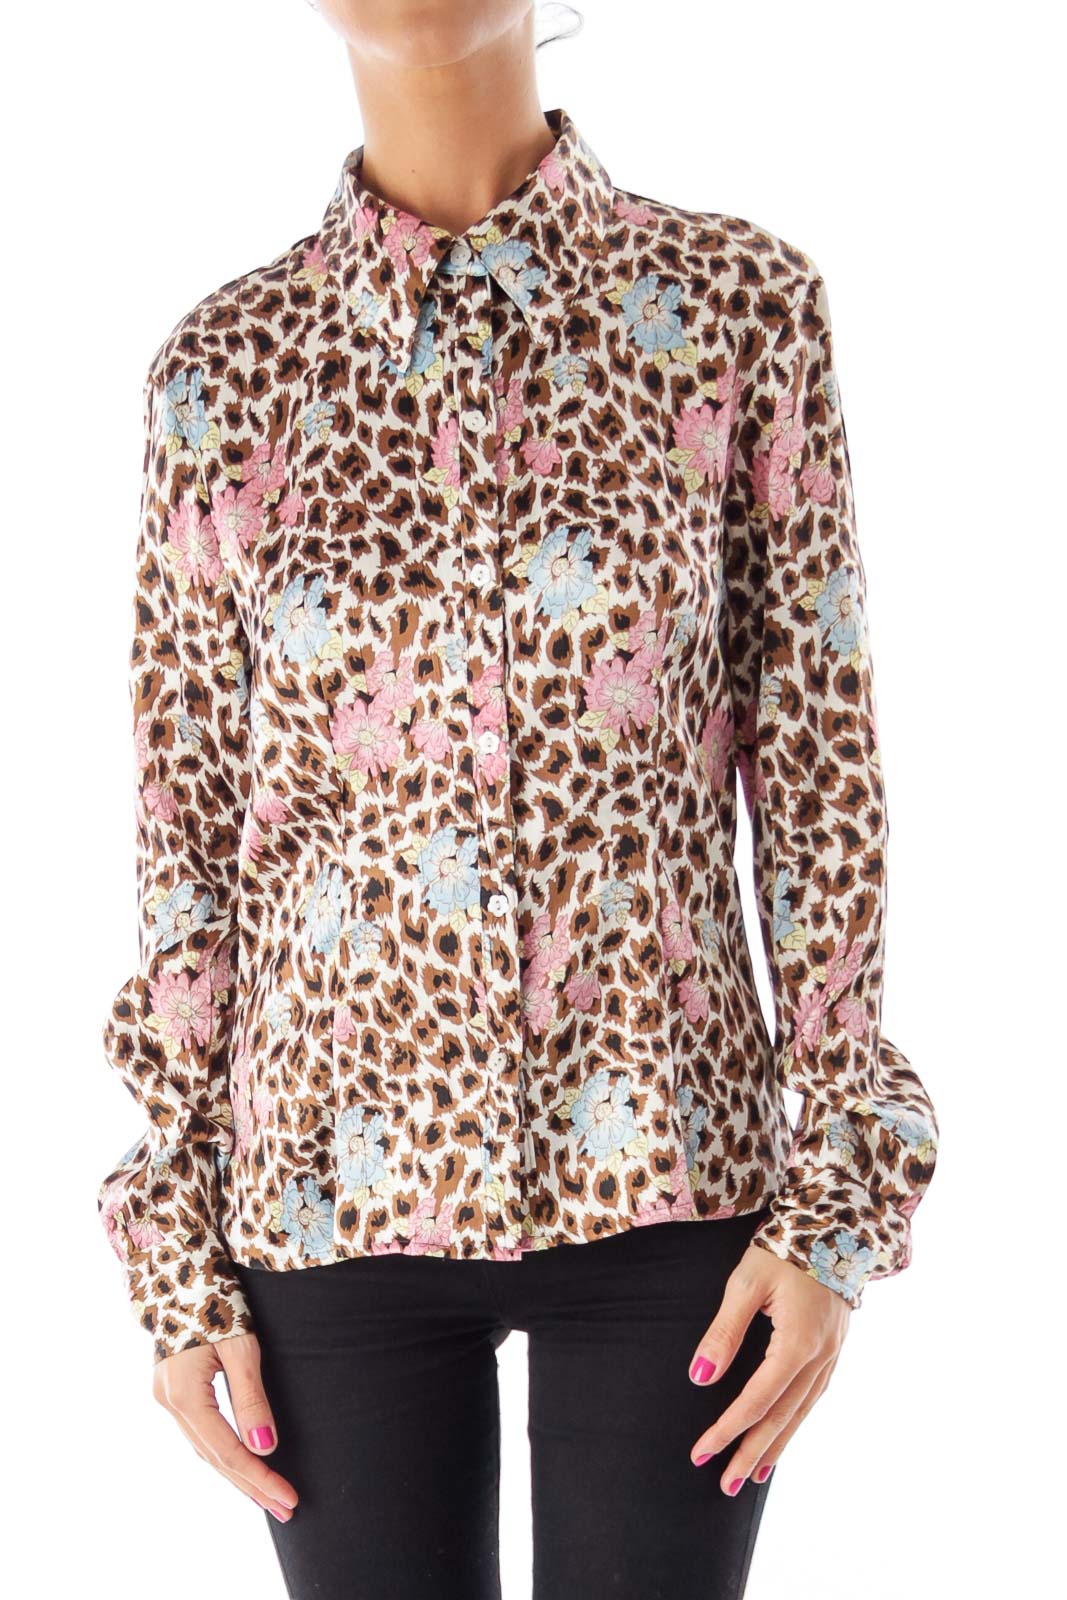 Animal Print & Floral Blouse Front